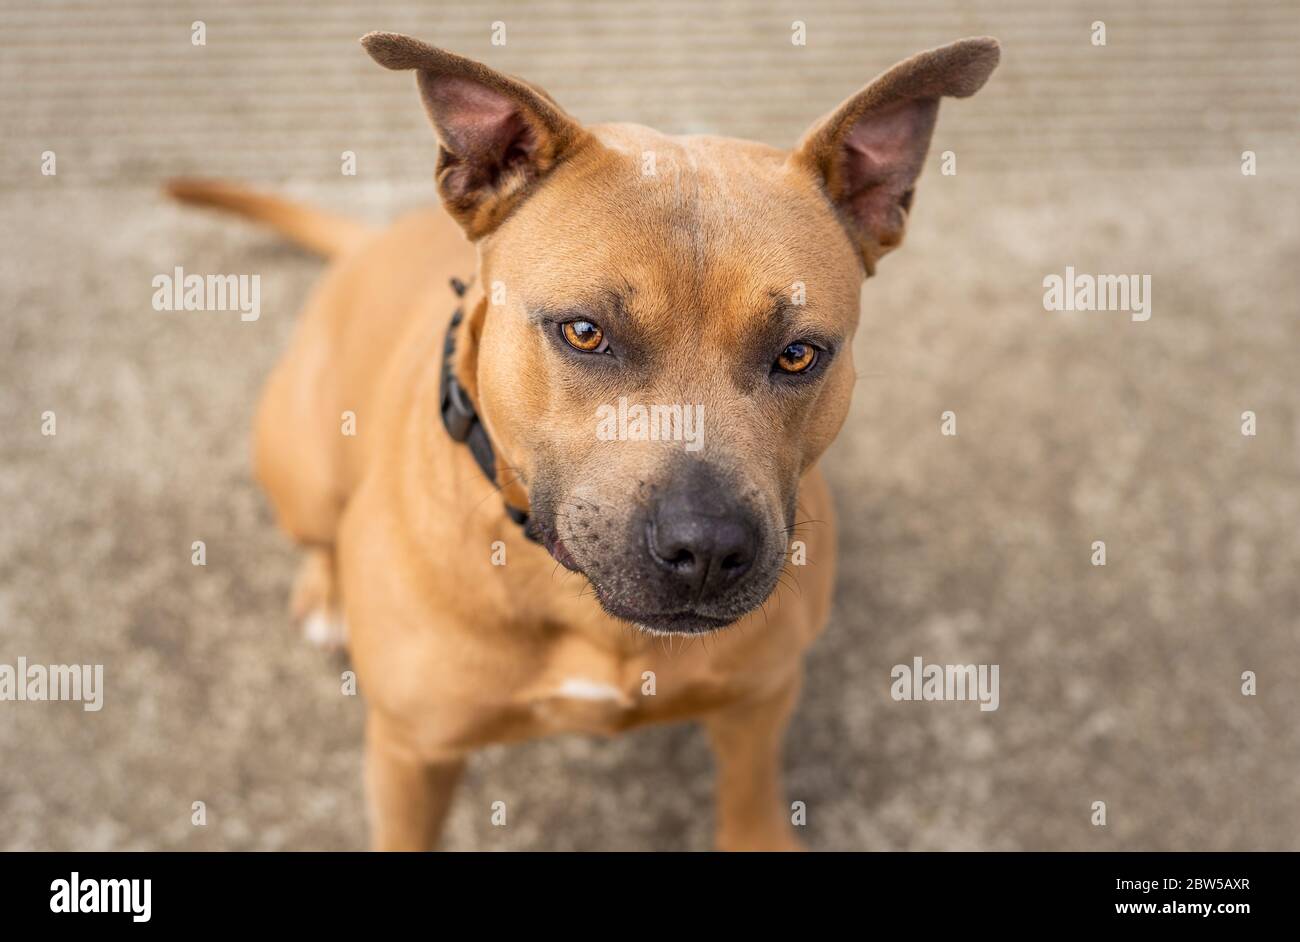 A beautiful brown and blue Pit Bull shelter dog looking at the camera Stock Photo